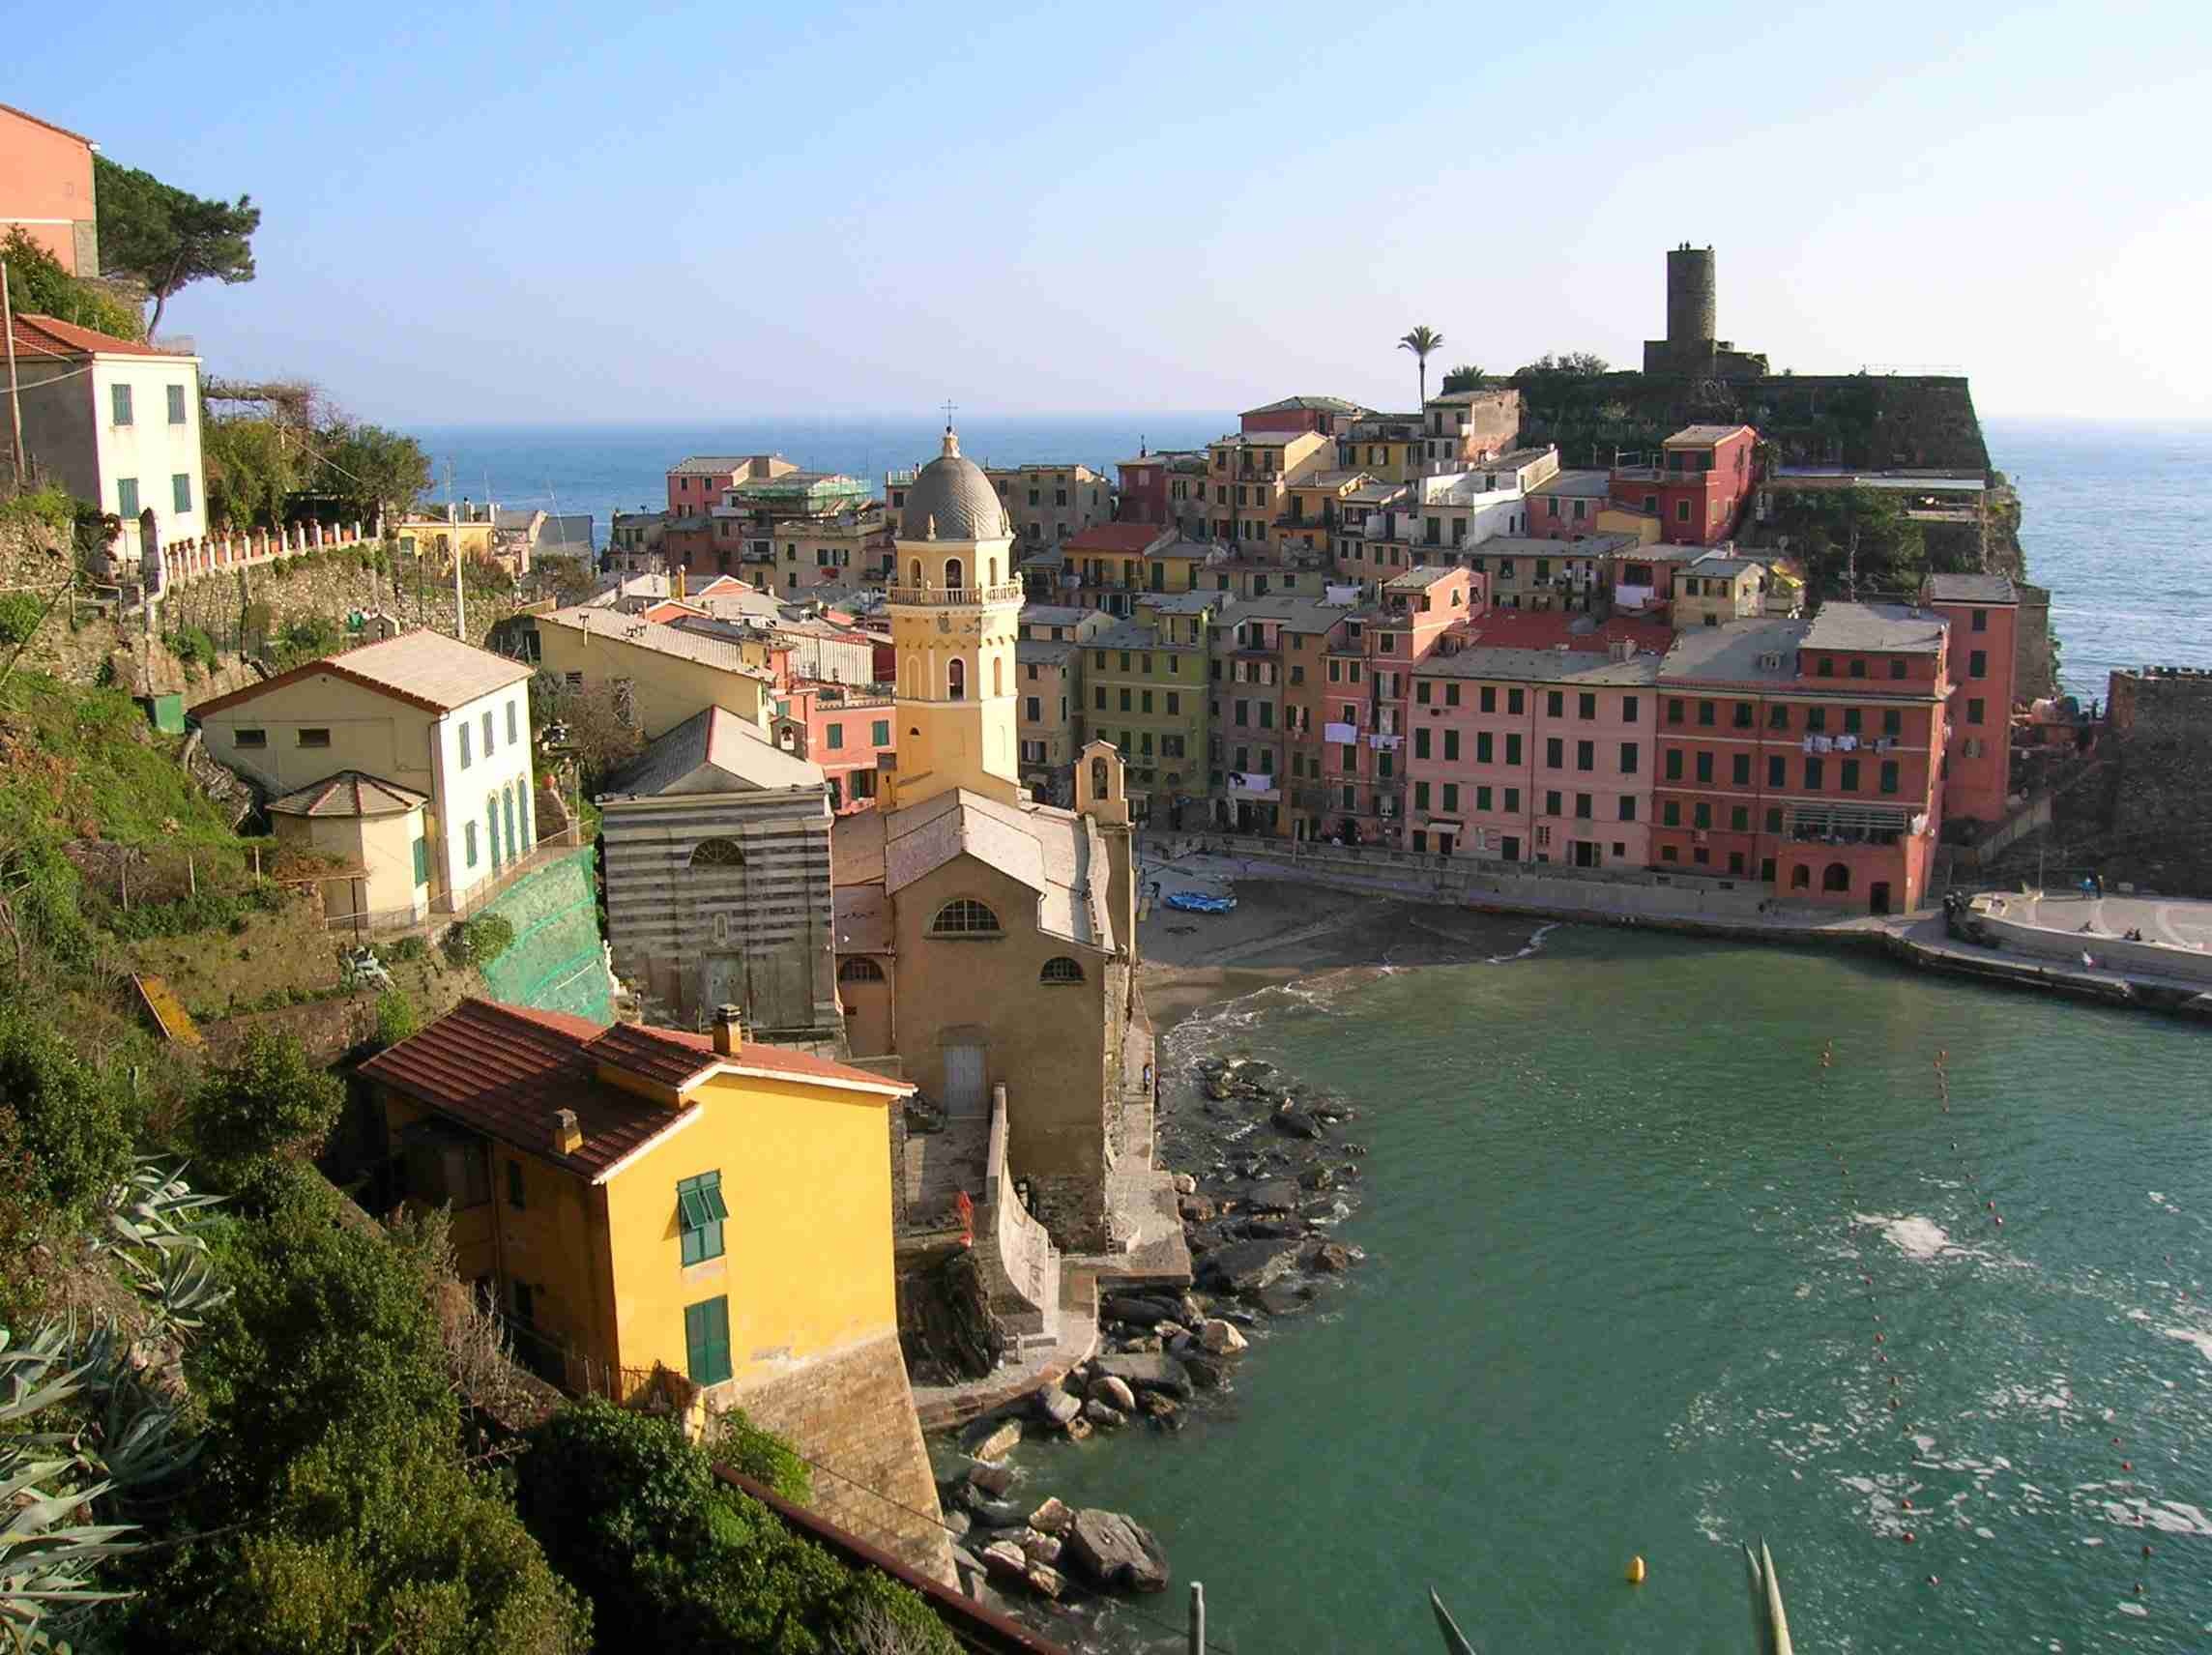 tourhub | The Natural Adventure | Cinque Terre Highlights on Foot 